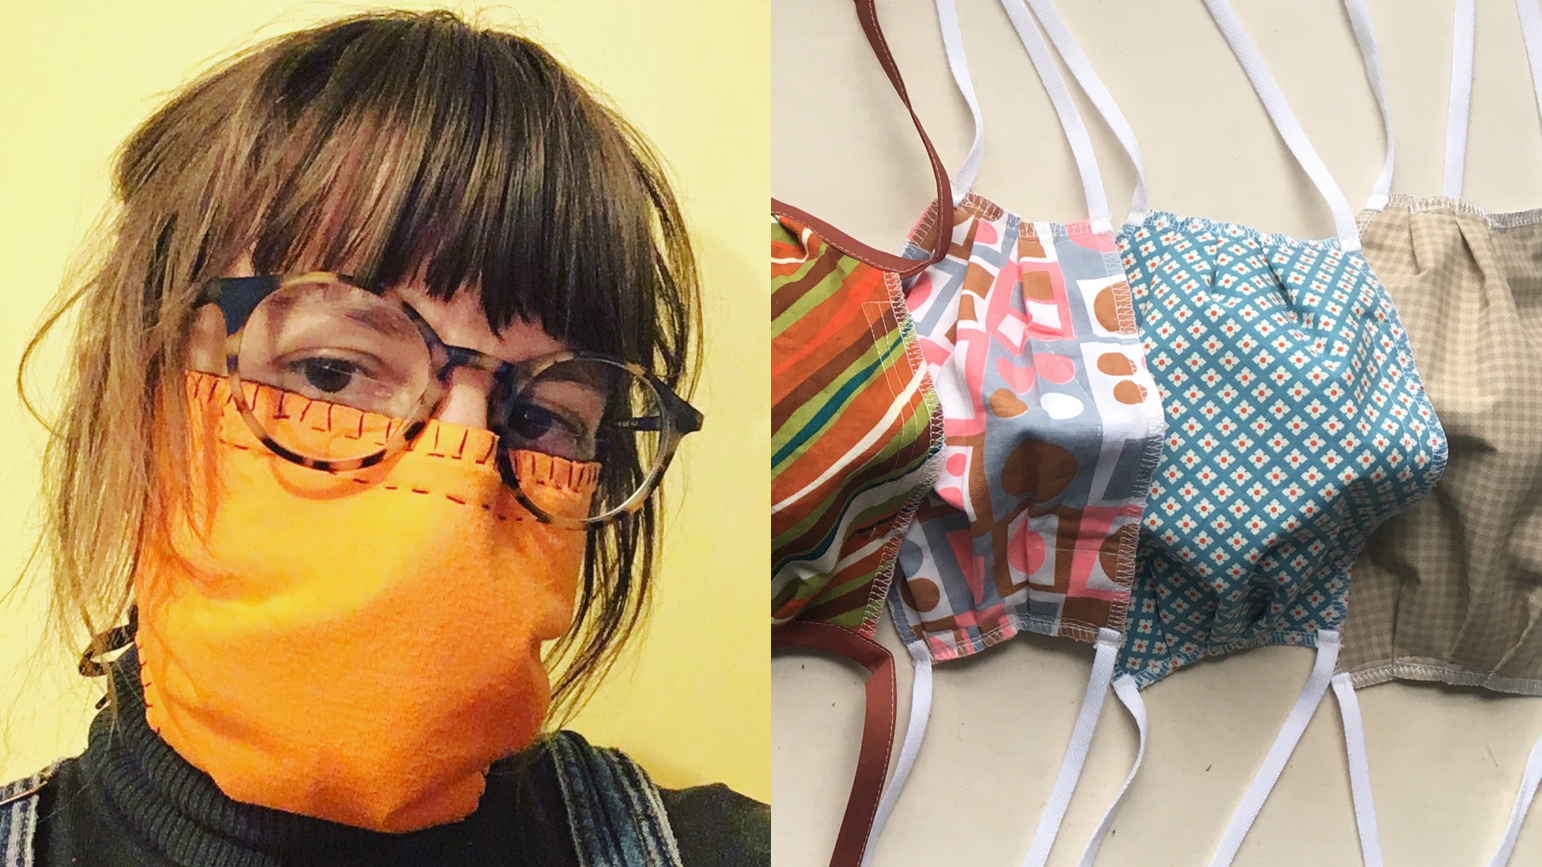 Image of Jenn Gooch wearing a hand-sewn maks and image of several masks lined up